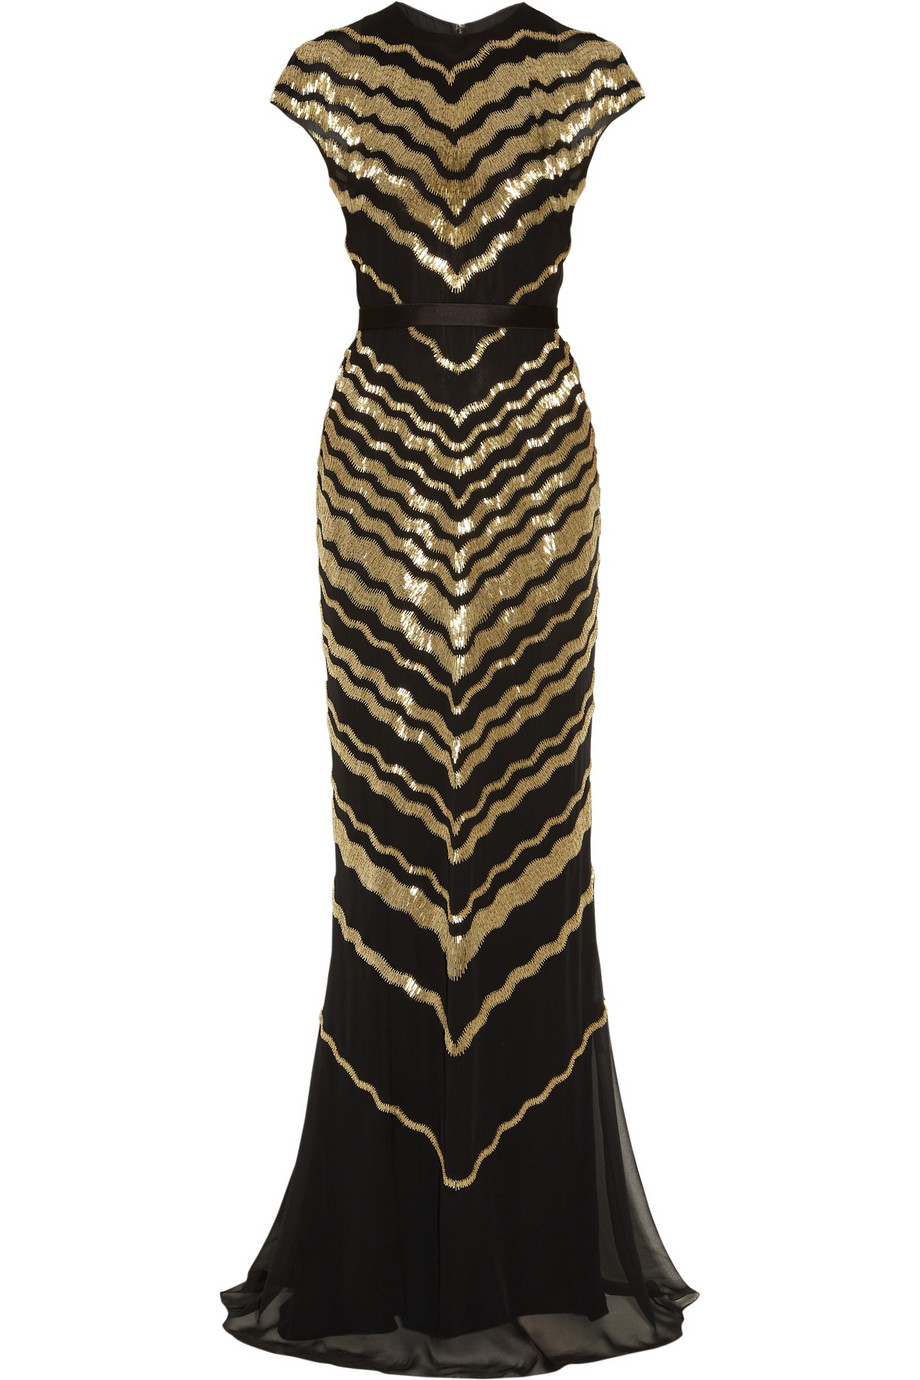 Black & Gold Gown from Jason Wu